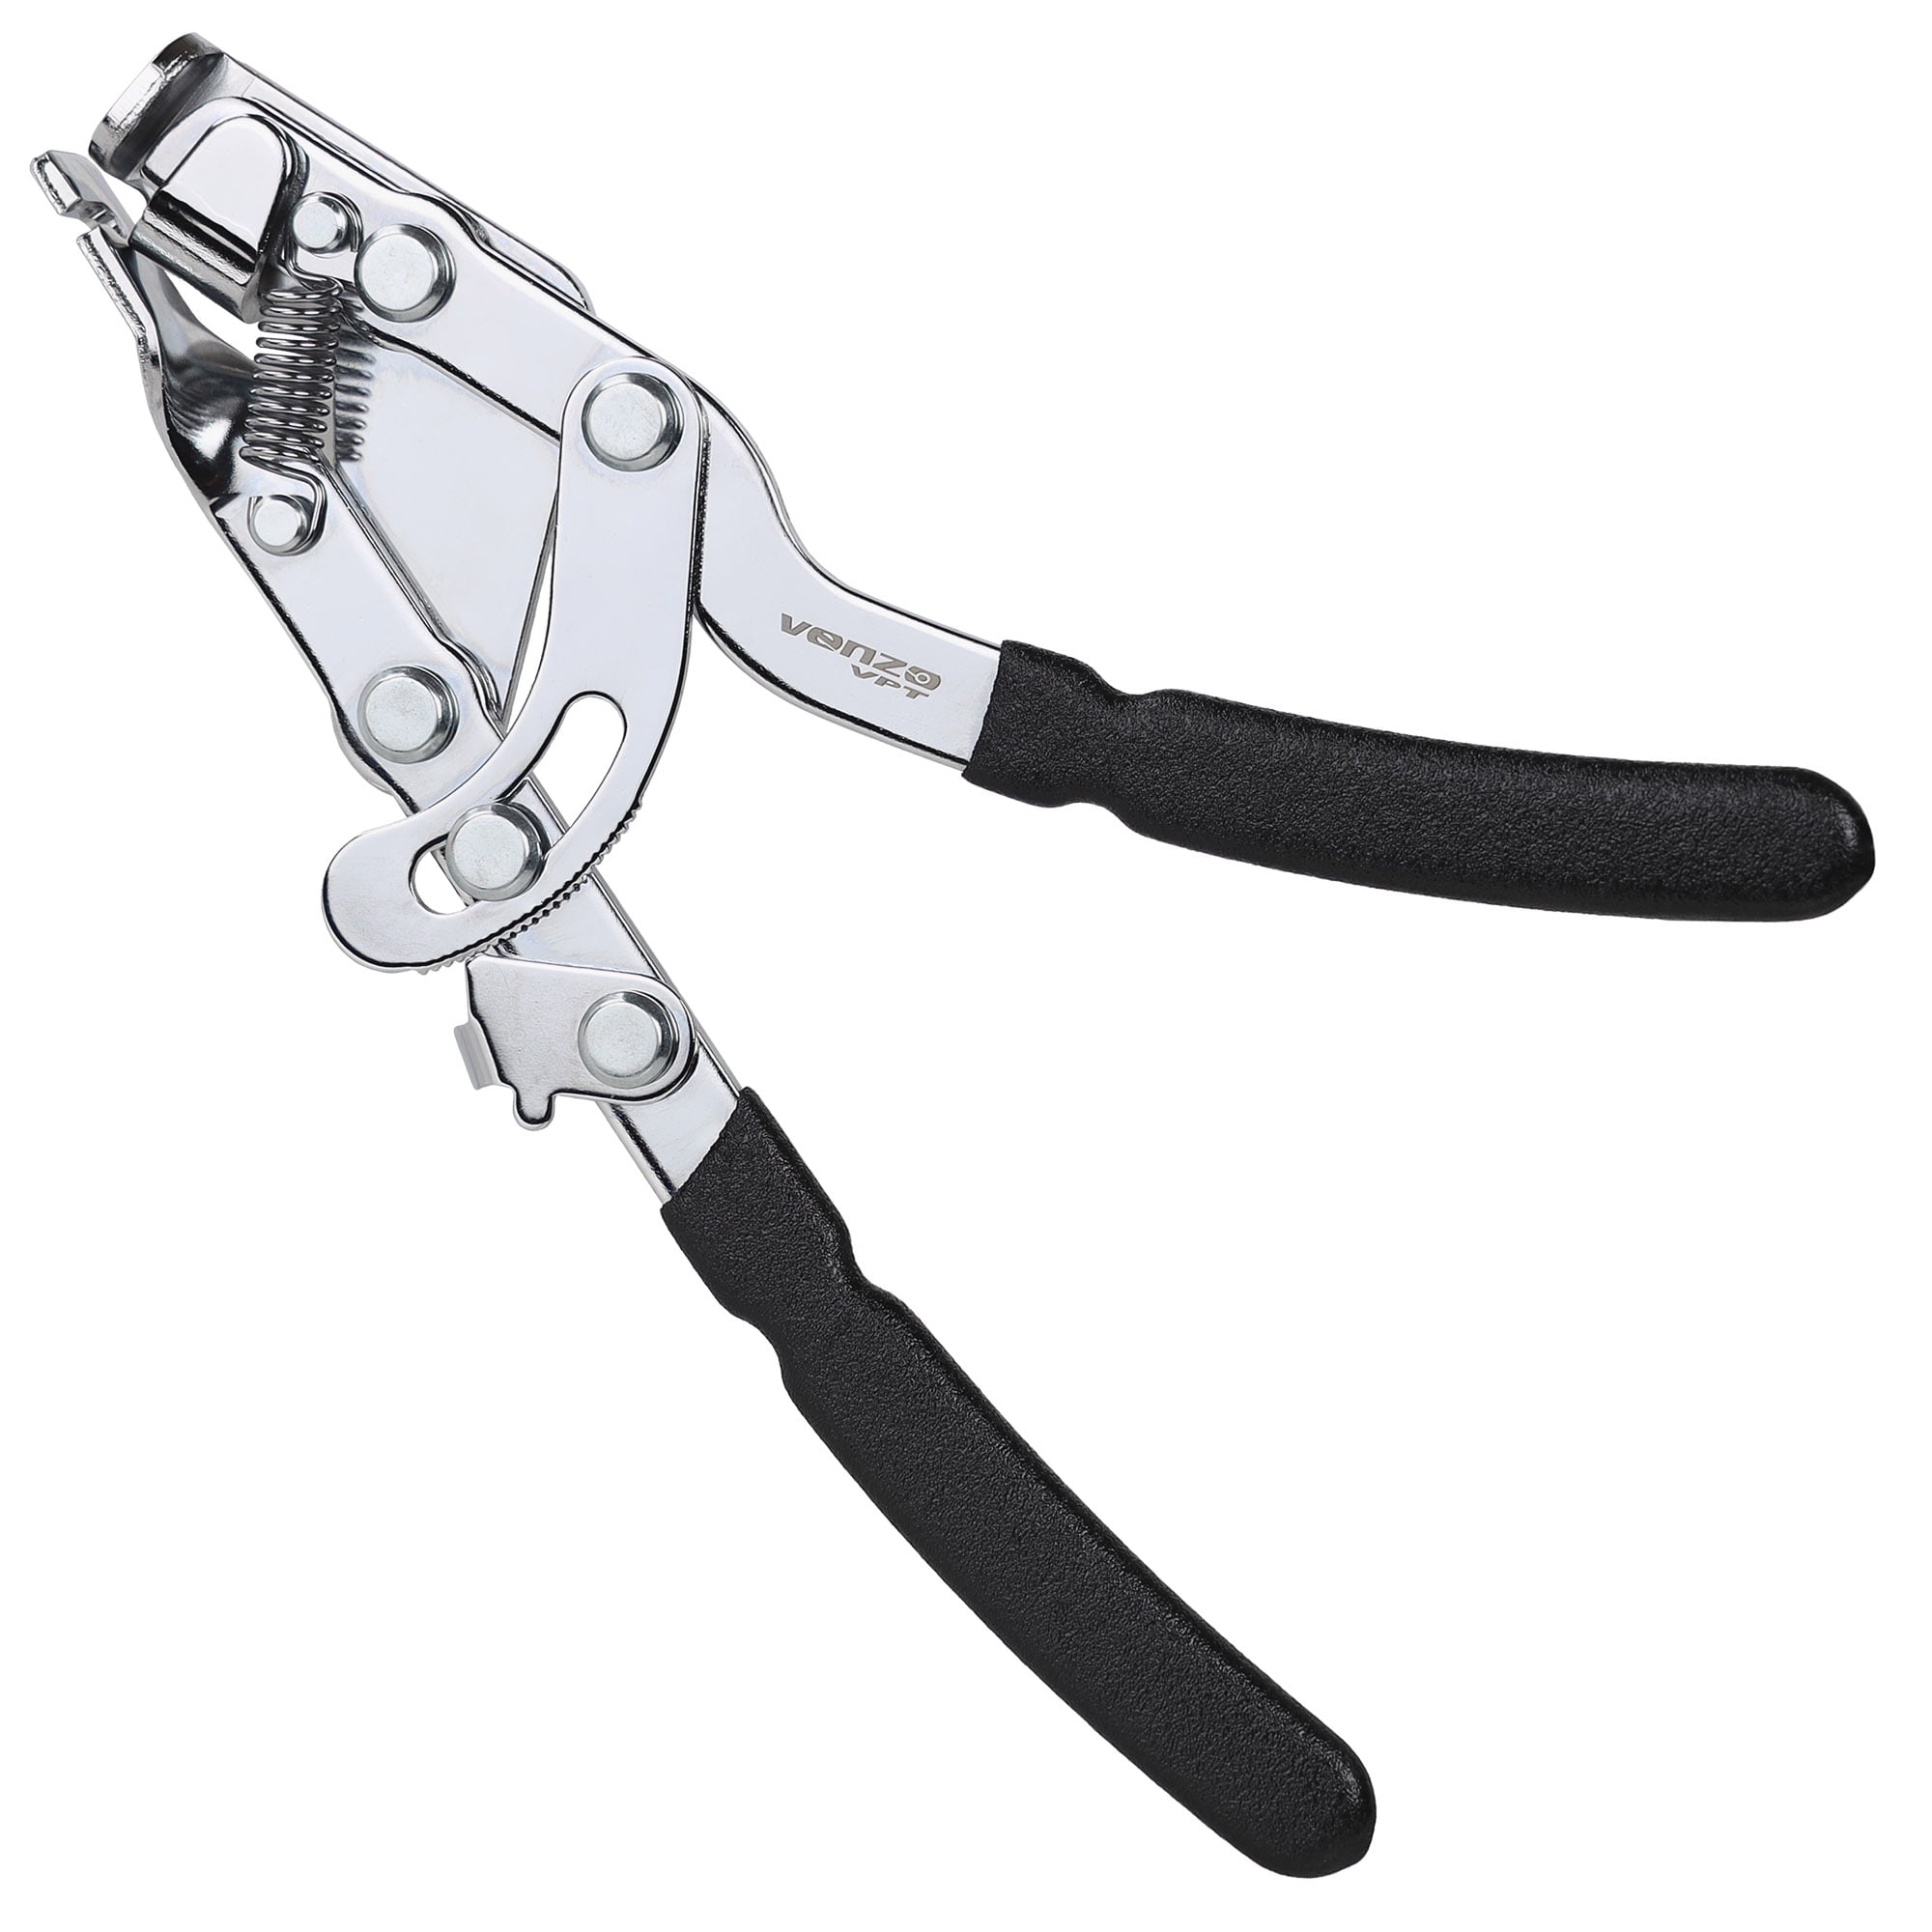 New Super B Bicycle Bike Cable Puller Plier 4th Hand Tool 